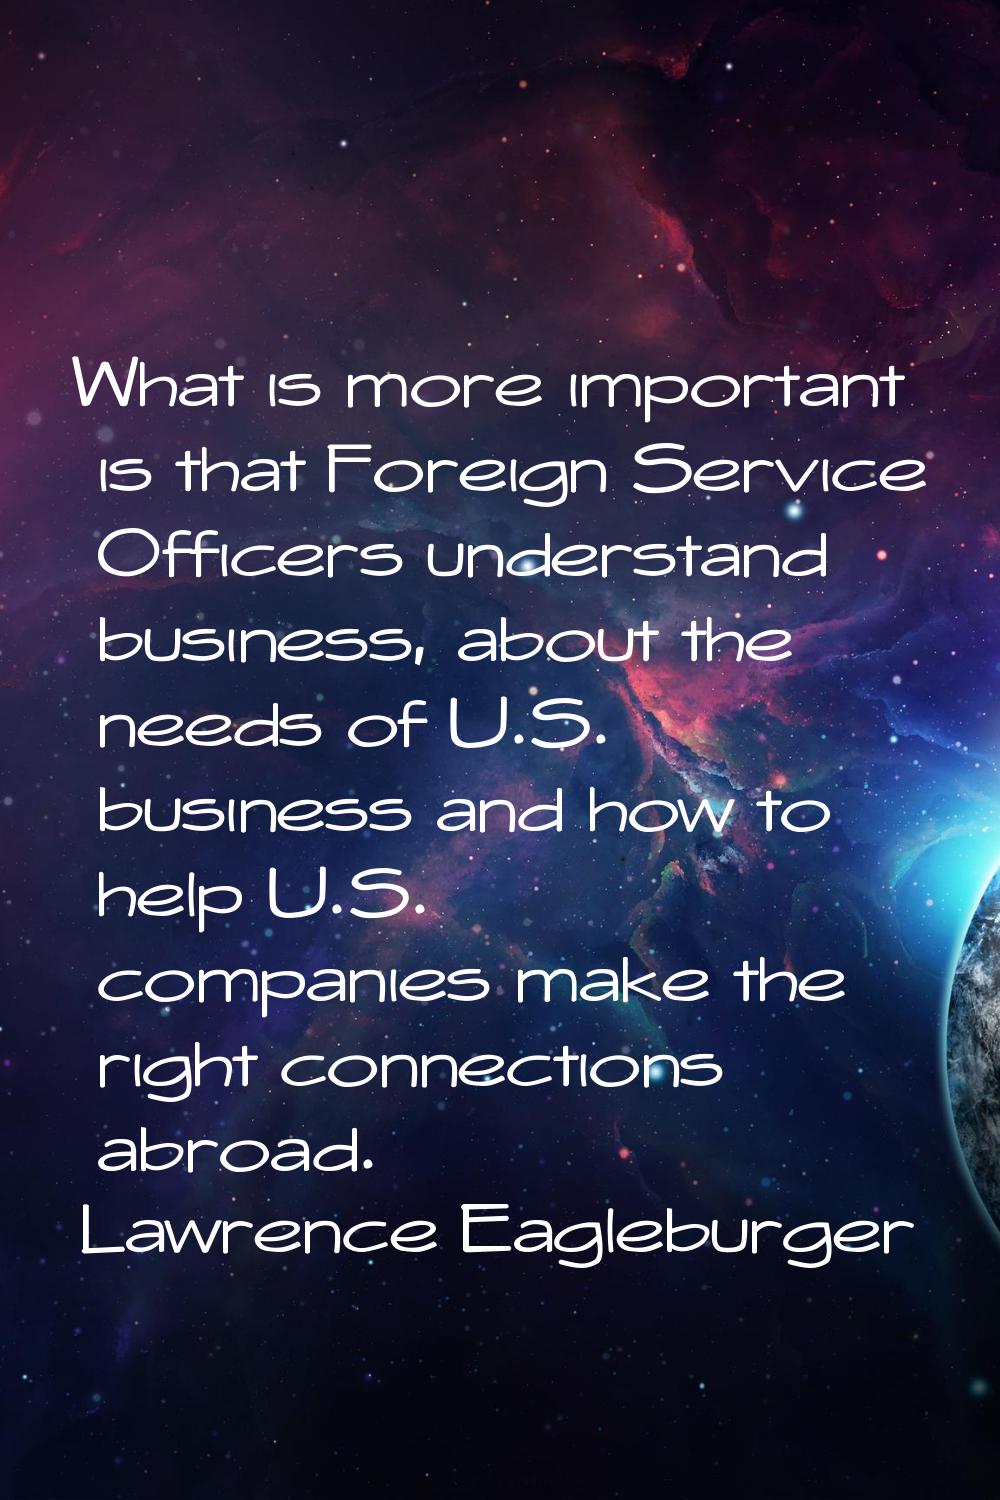 What is more important is that Foreign Service Officers understand business, about the needs of U.S